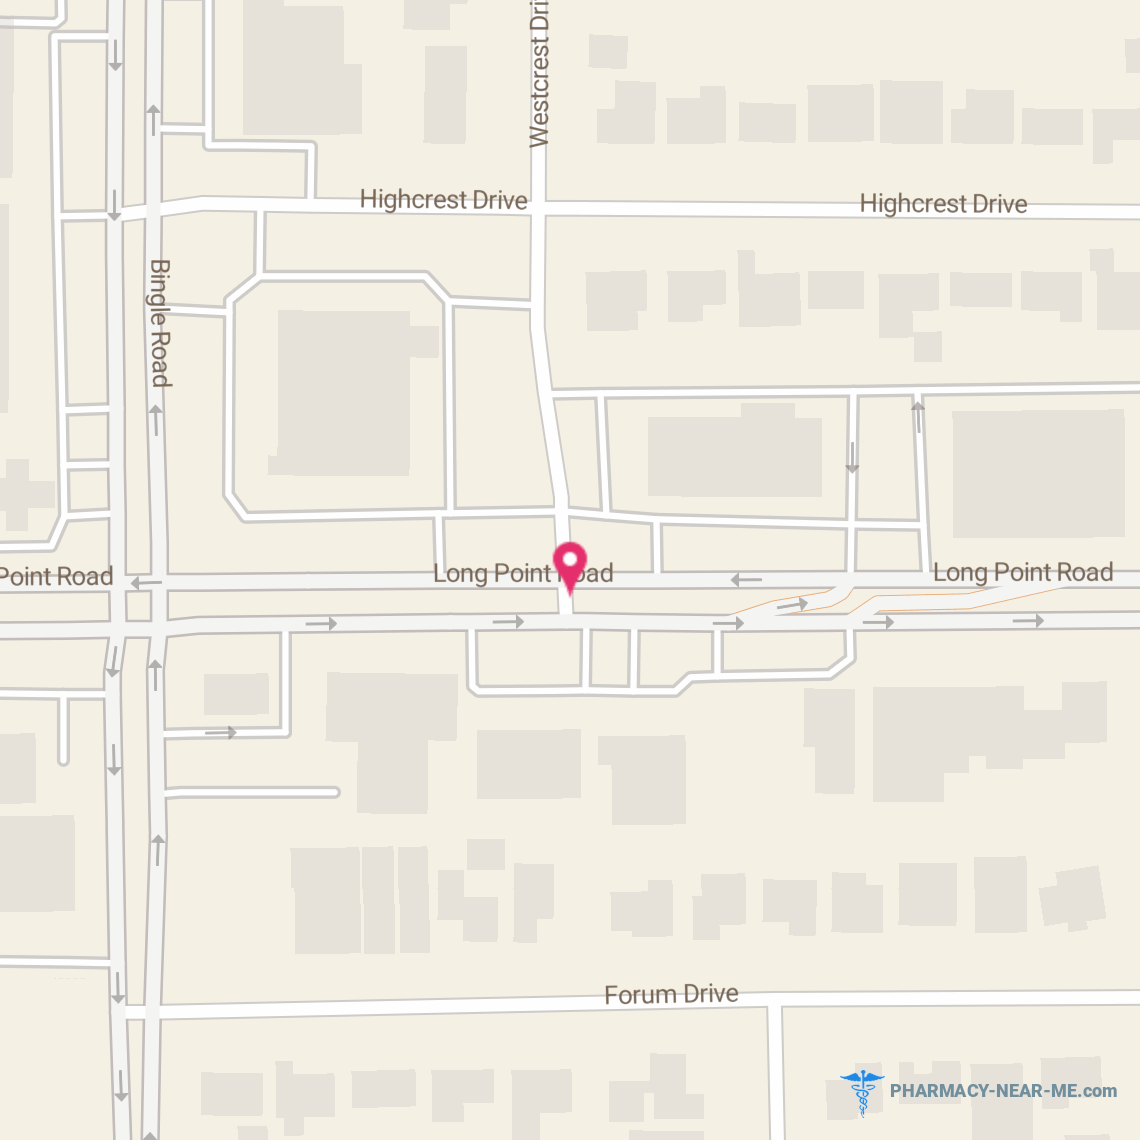 WALGREENS #03820 - Pharmacy Hours, Phone, Reviews & Information: 8590 Long Point Road, Houston, Texas 77055, United States